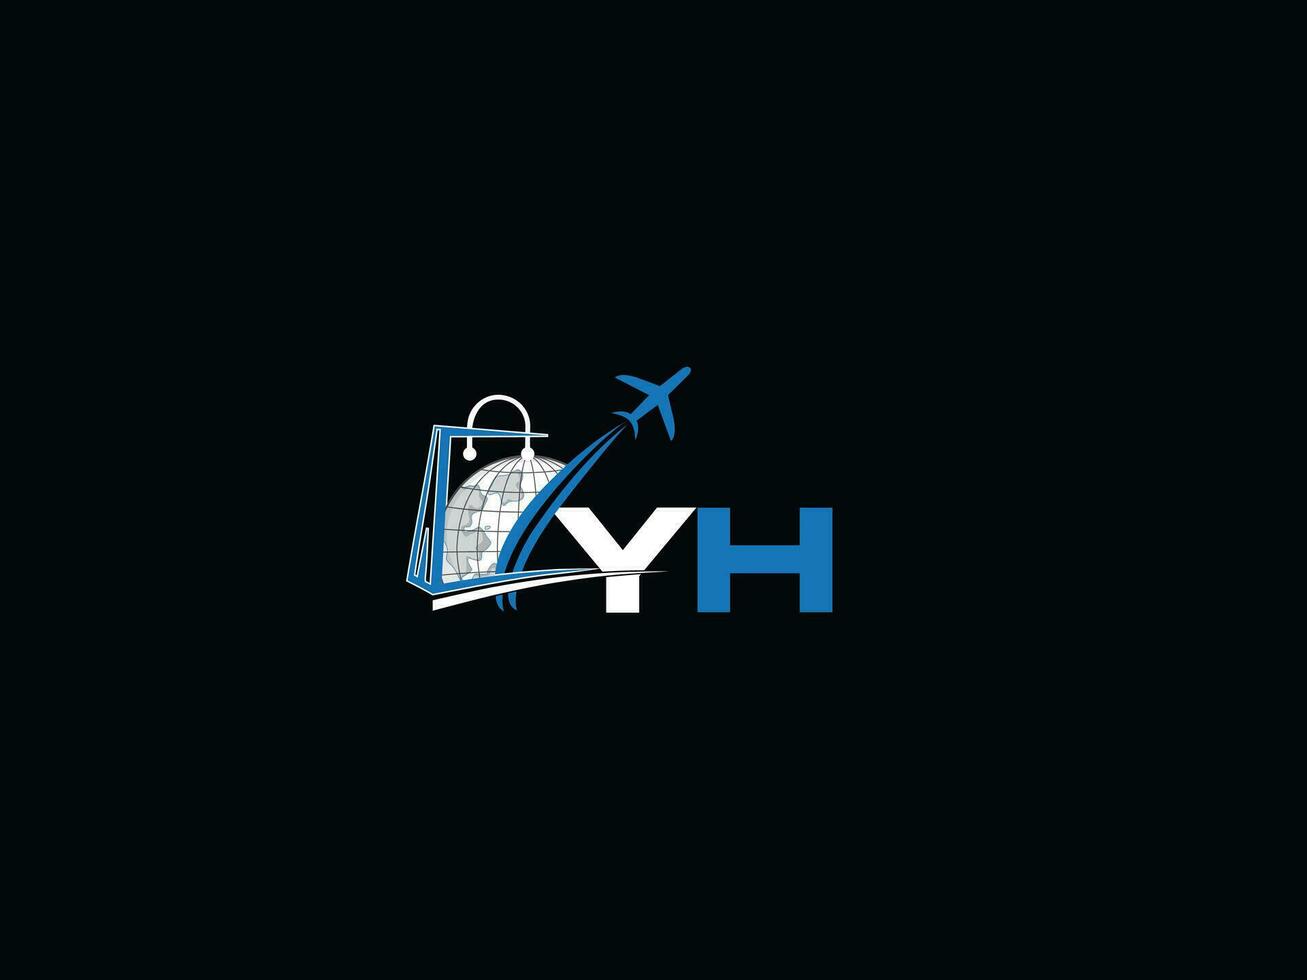 Logotype Global Yh Logo Icon Vector, Abstract Air YH Logo For Travel Agency vector